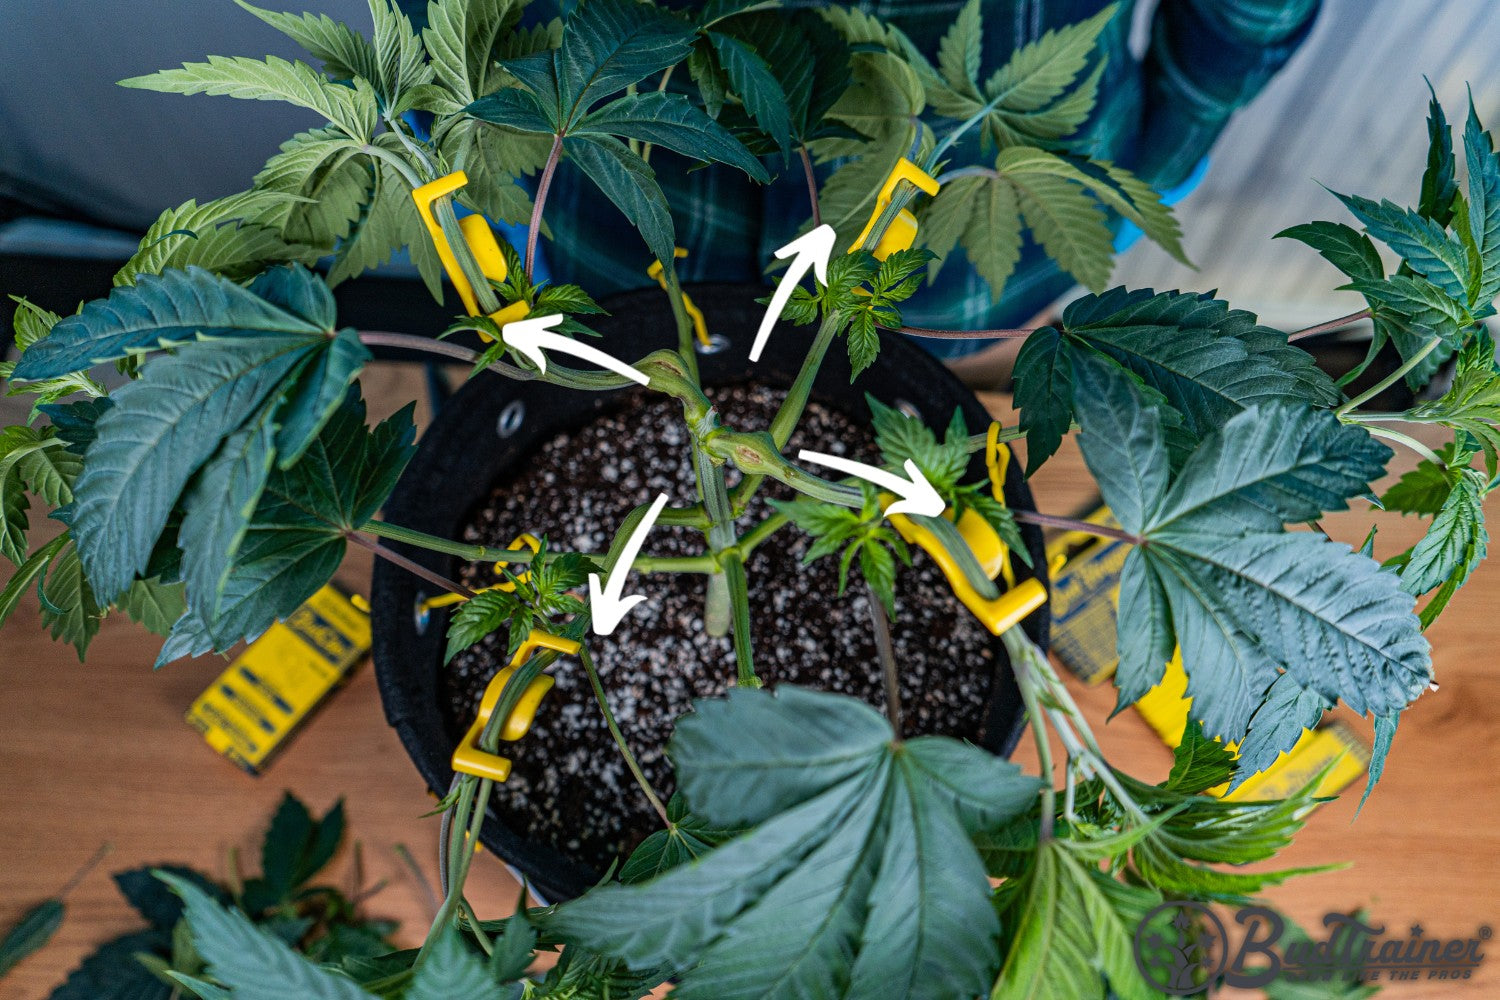 A top view of a cannabis plant in a black fabric pot, with several branches secured using yellow BudClips. Arrows indicate the positions where the BudClips are attached to the branches, guiding their growth. The plant's leaves are green and healthy, and the soil in the pot is covered with white perlite for aeration. Packaging for the BudClips is visible on the table beside the pot.